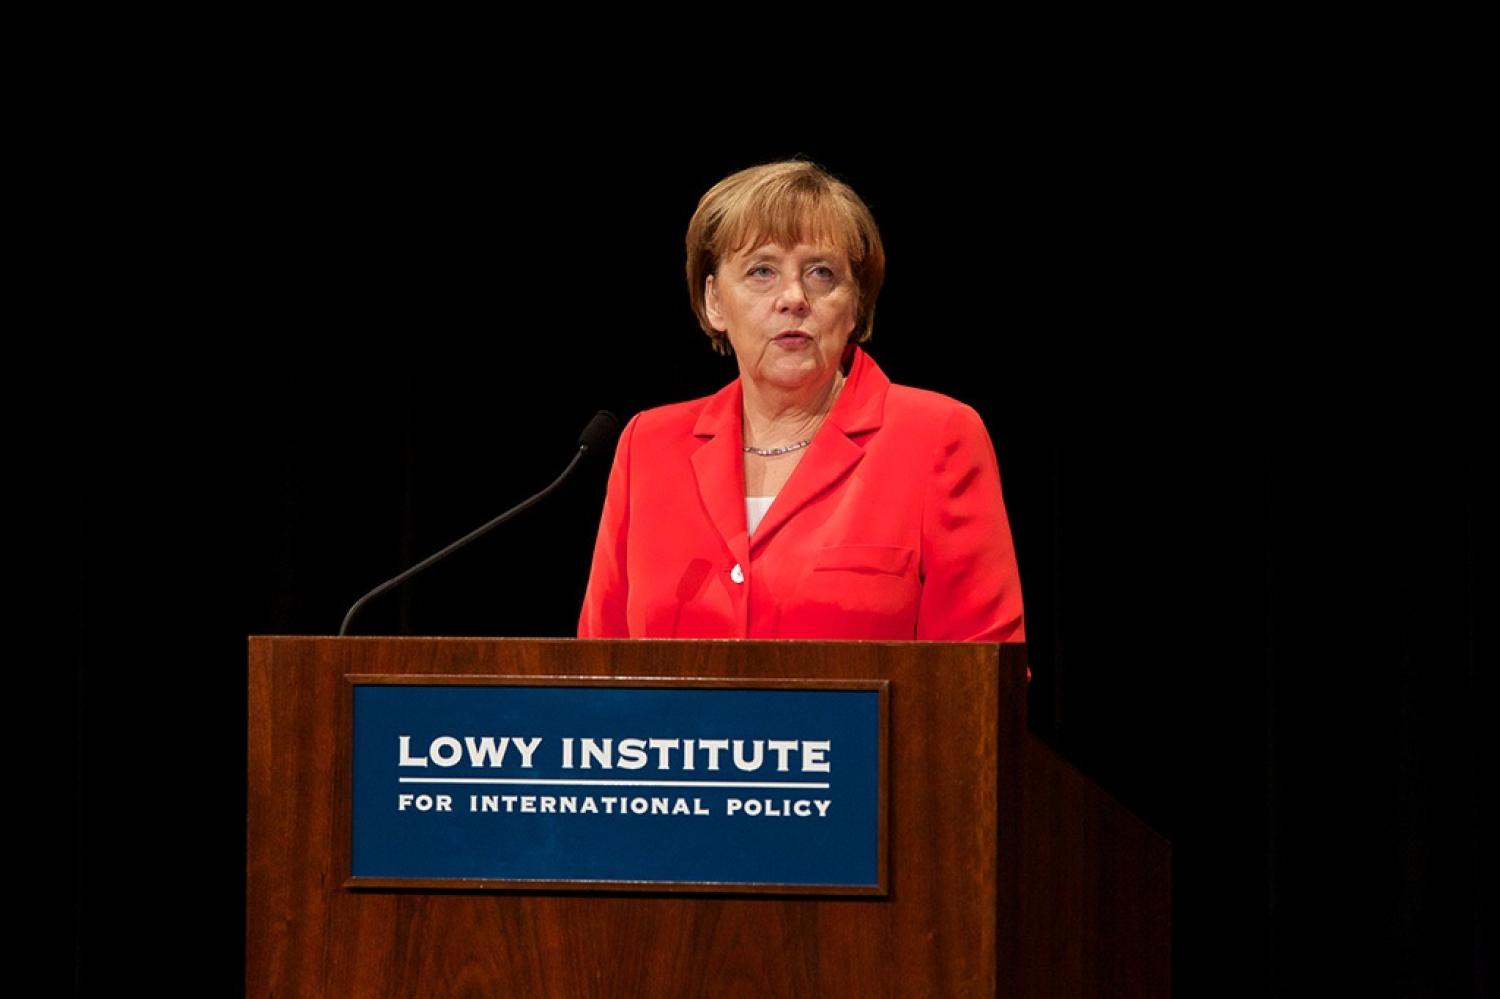 German Chancellor Angela Merkel speaks at the Lowy Institute for International Policy, Sydney, 17 November 2014 (Lisa Maree Williams/Getty Images)